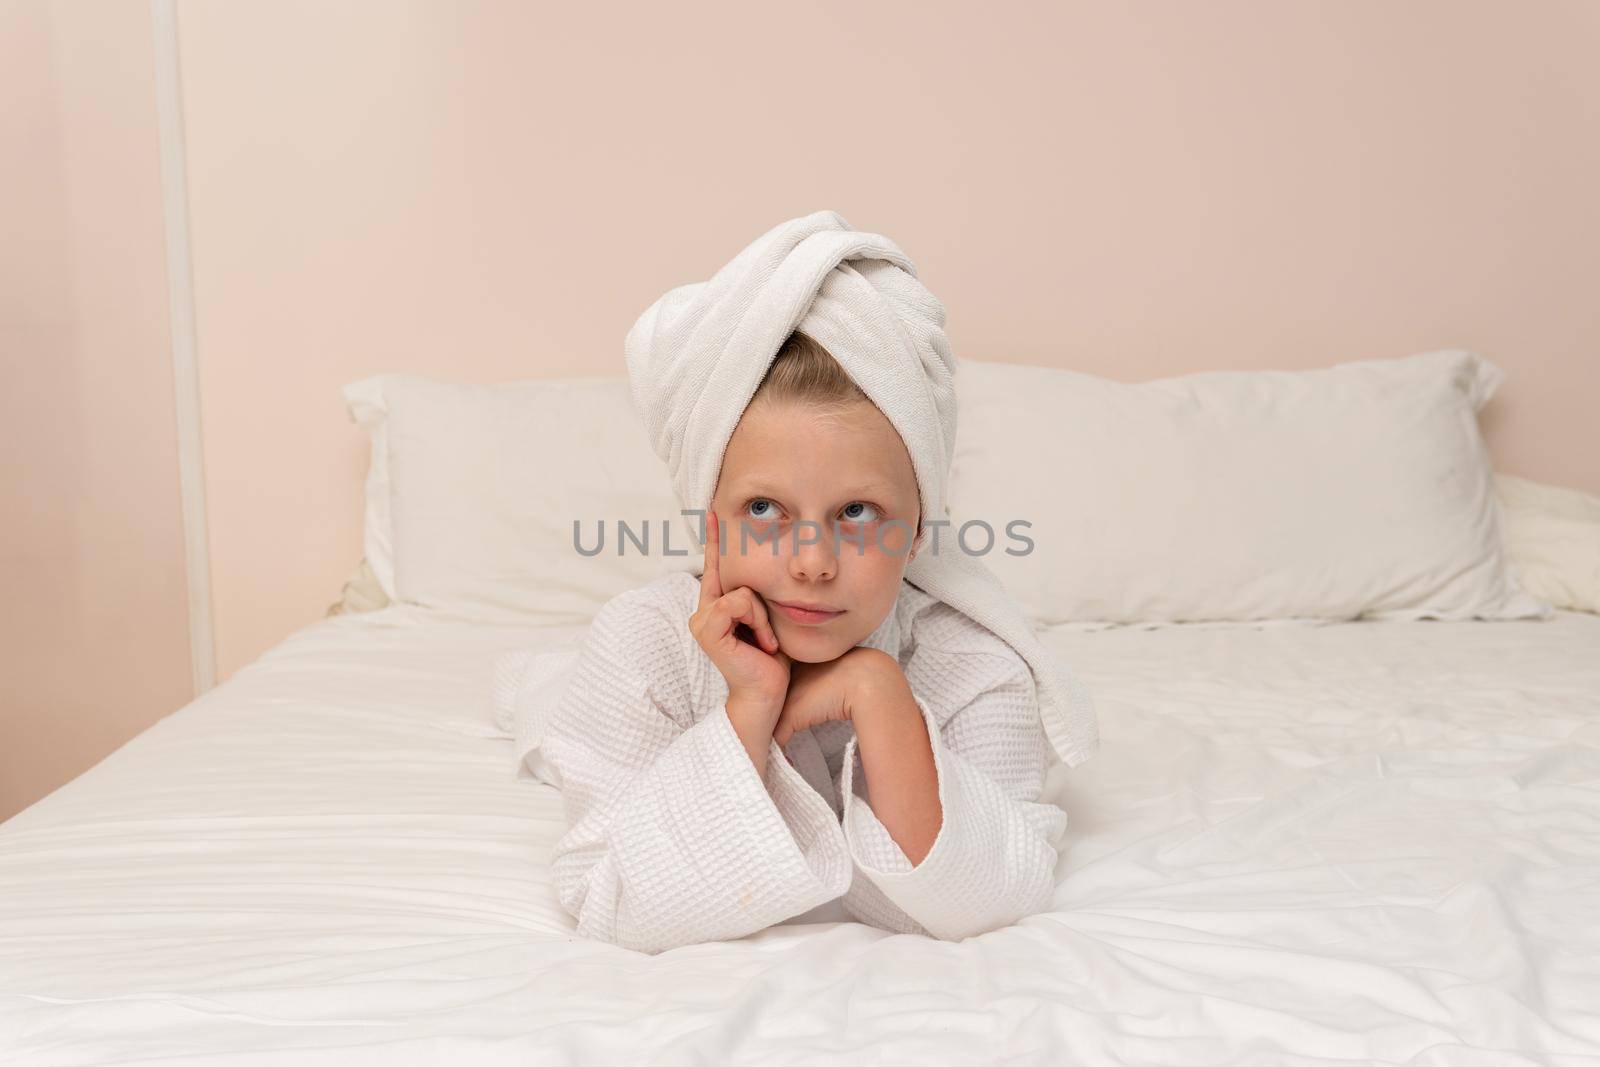 Elbows bathrobe Creek smile copyspace coffee bed girl portrait morning, from people pretty in bath from caucasian take, child bathing. Hair health fashion, by 89167702191